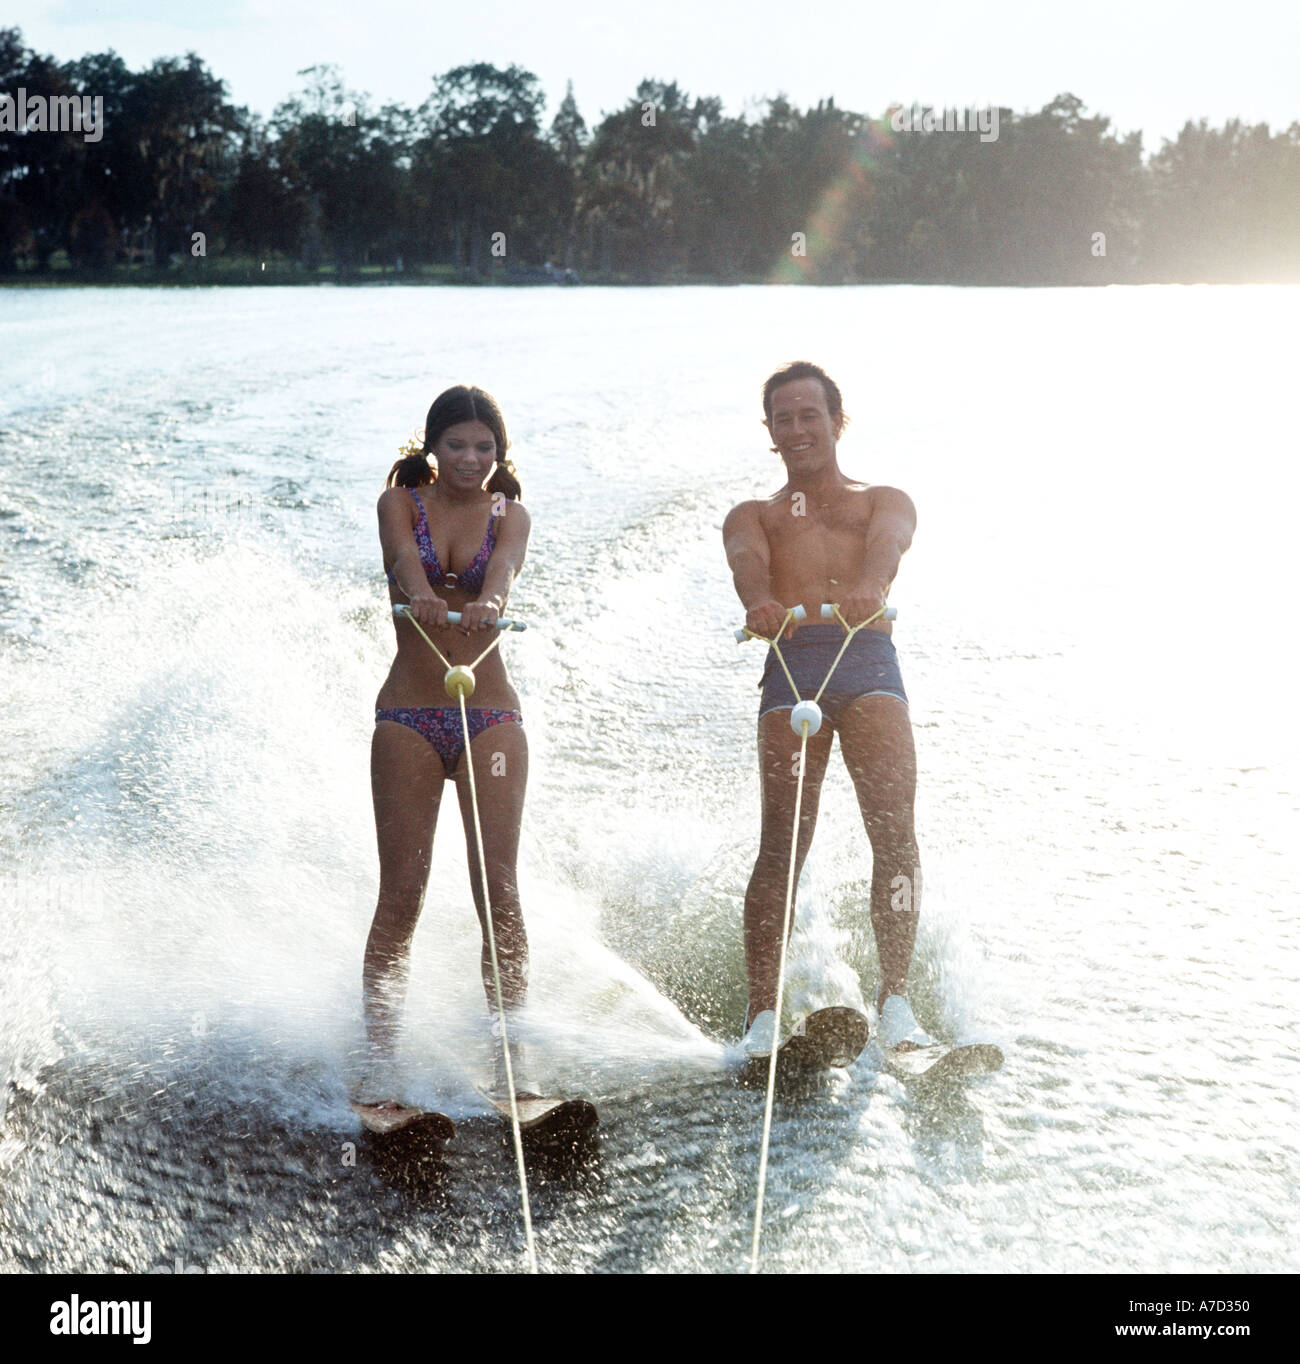 young couple water skiing Stock Photo